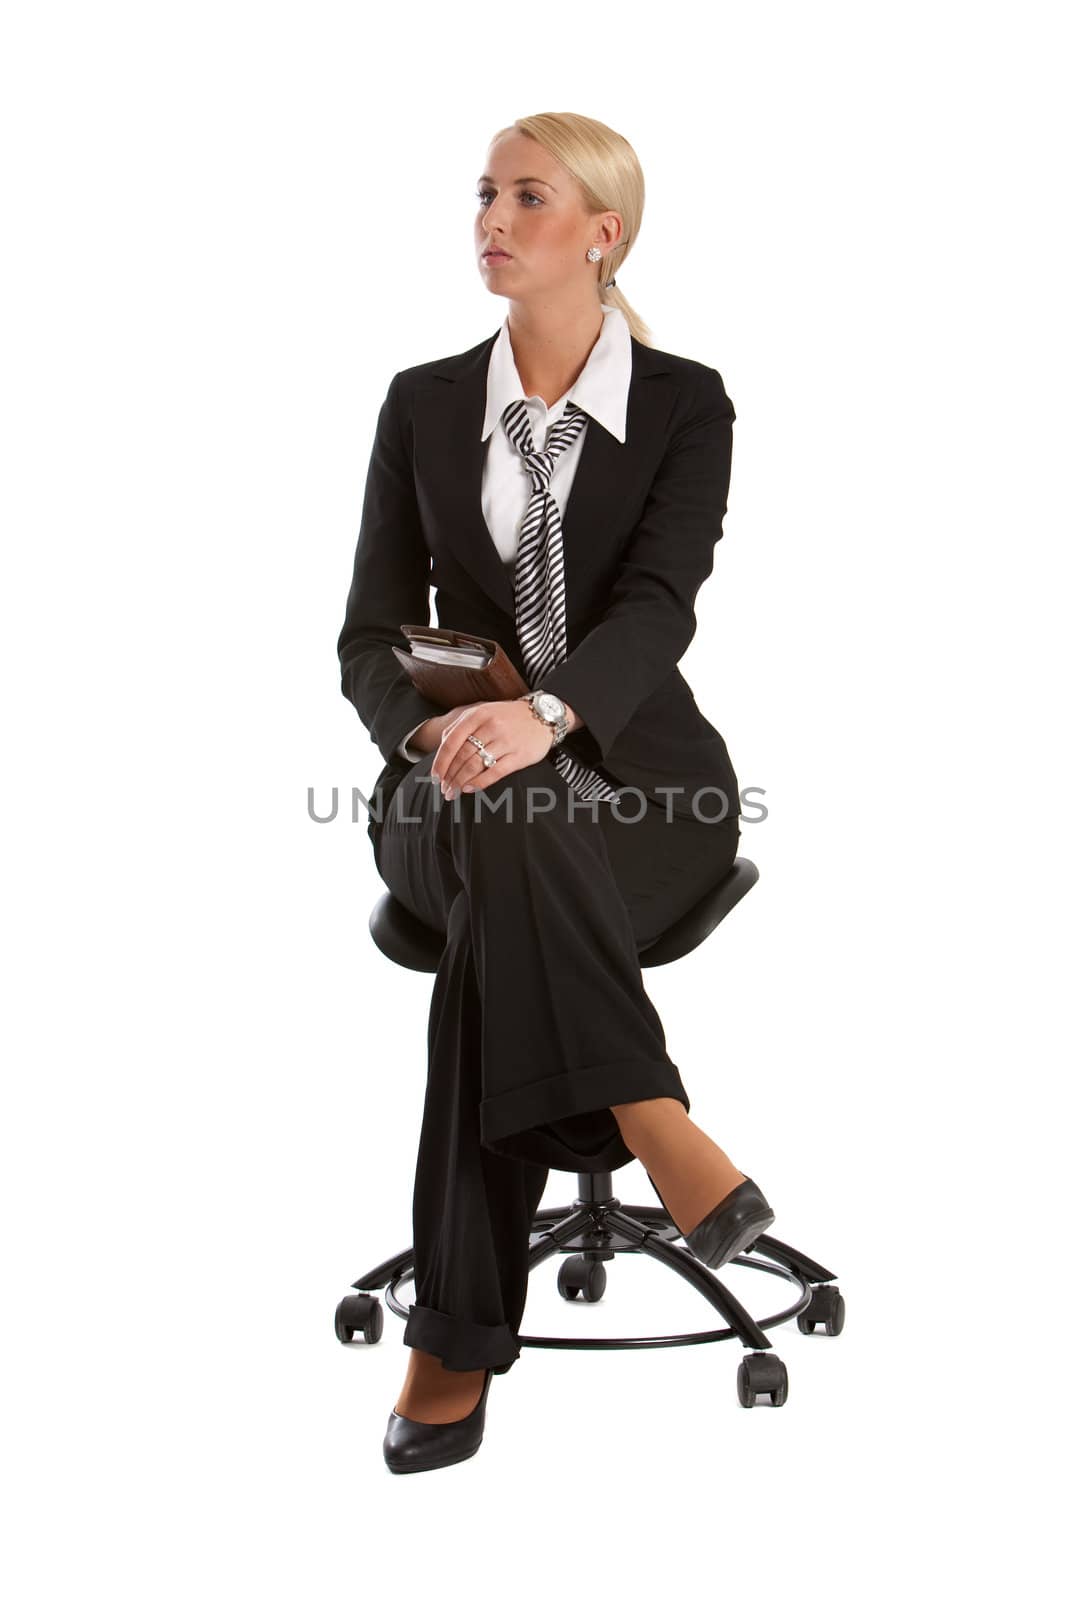 Business woman sitting on a chair patiently waiting on white background